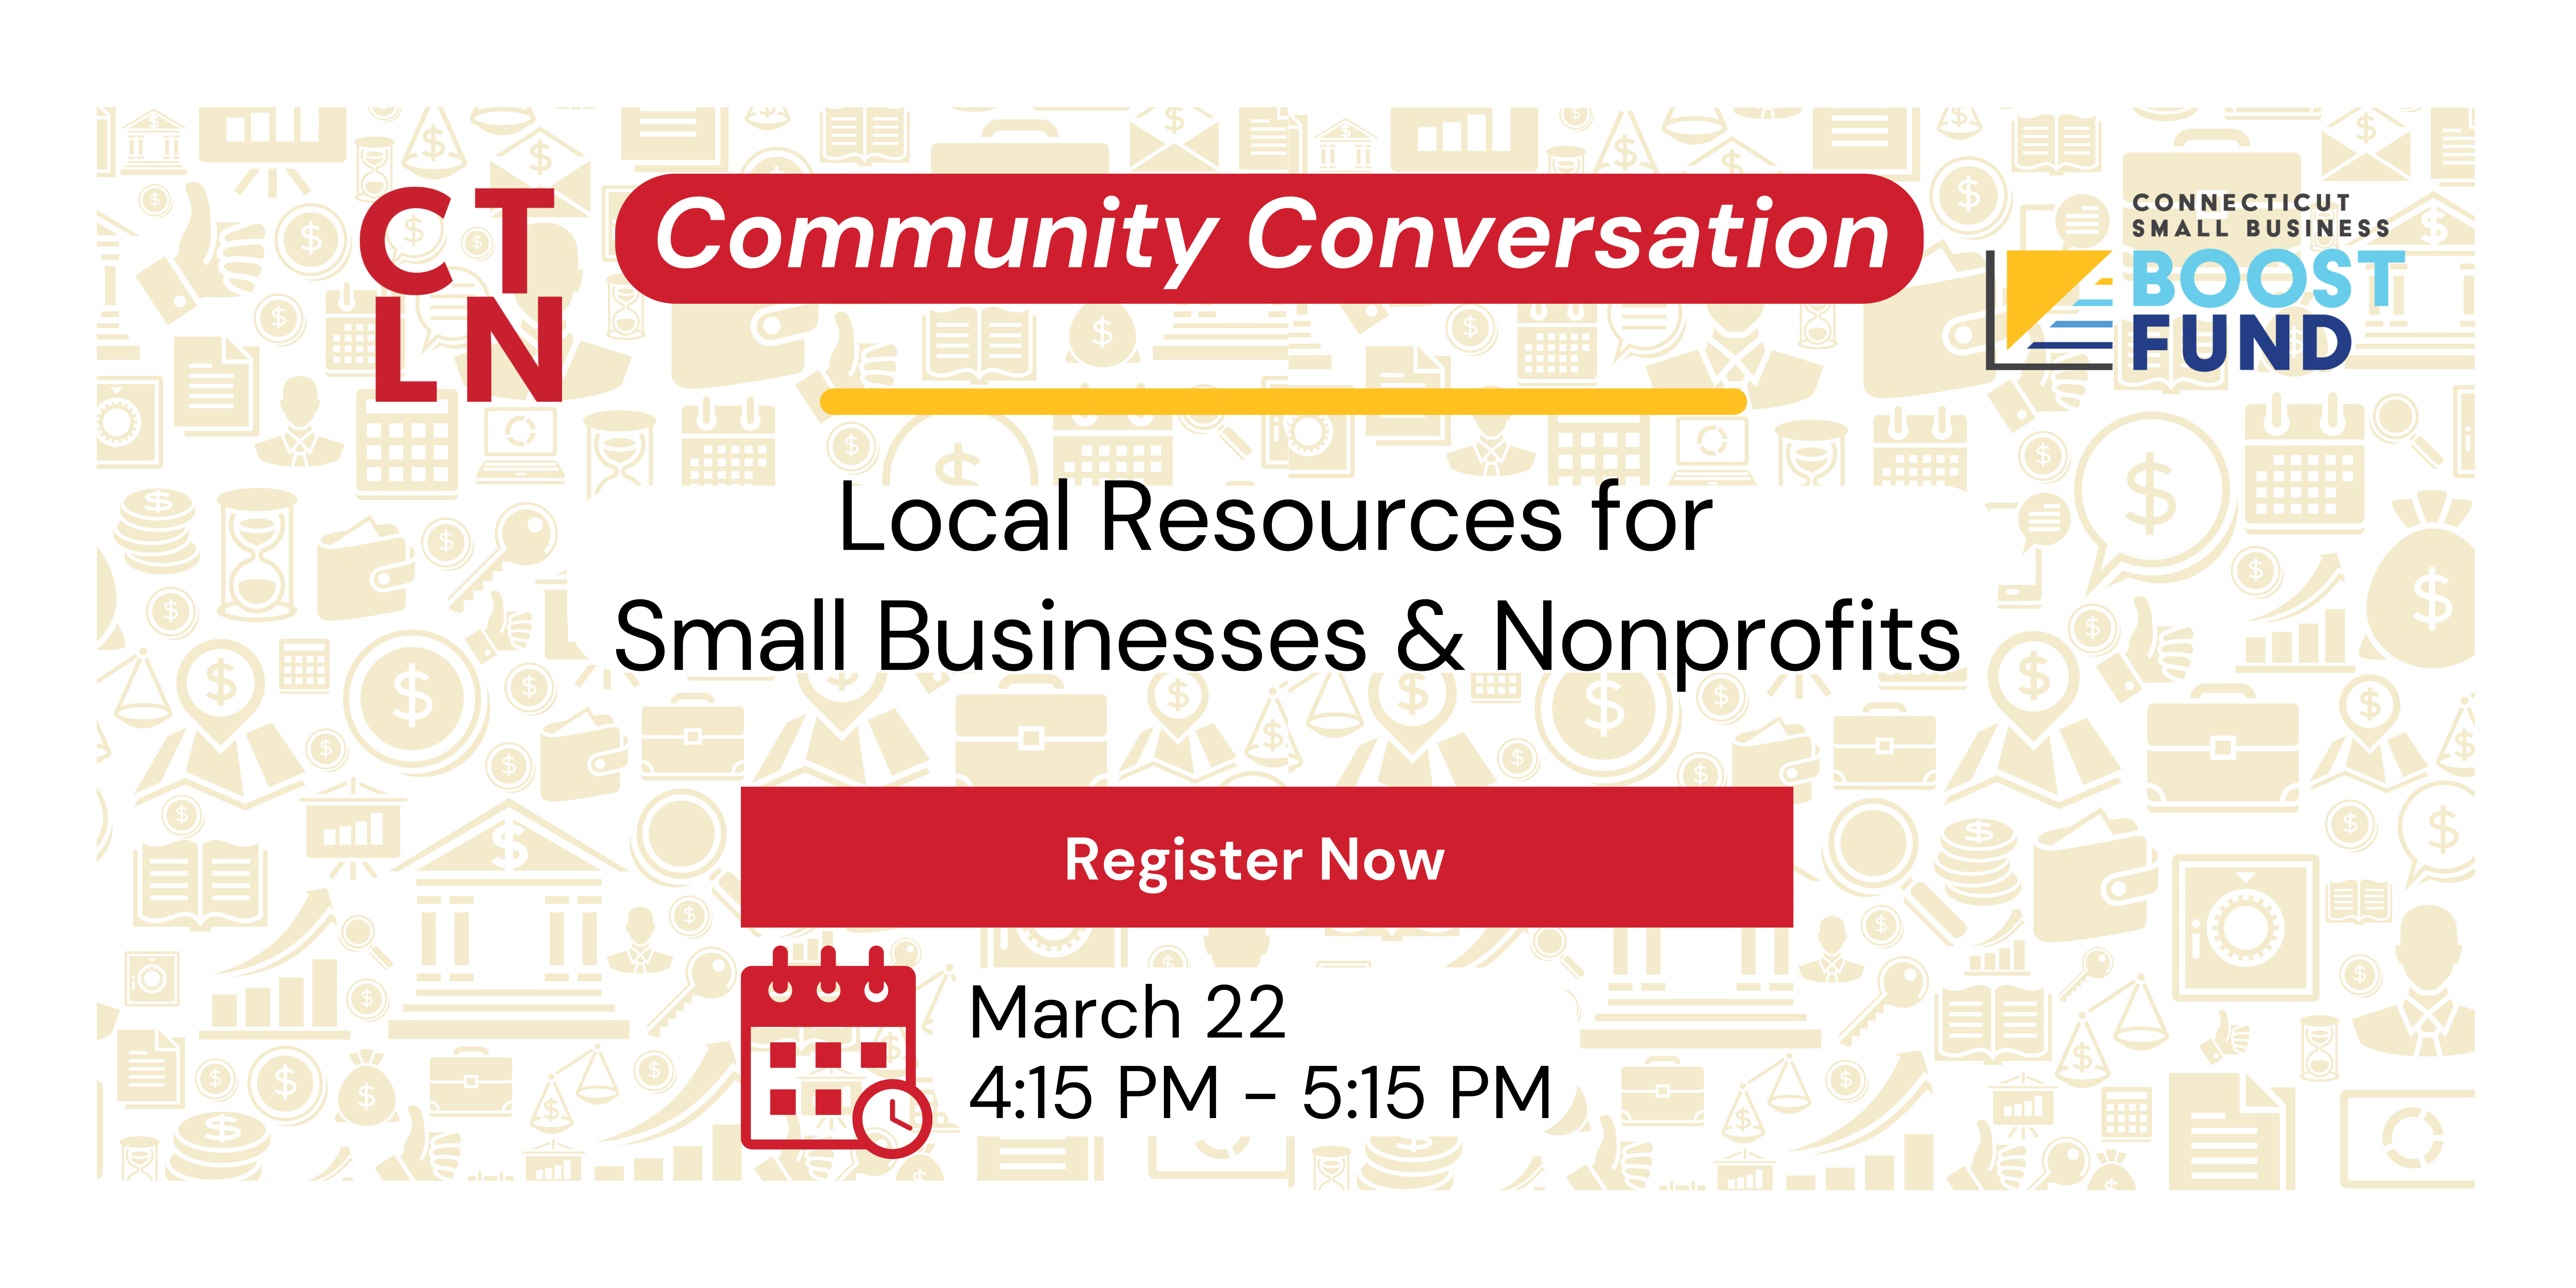 Community Conversation: Local Resources for Small Businesses & Nonprofits